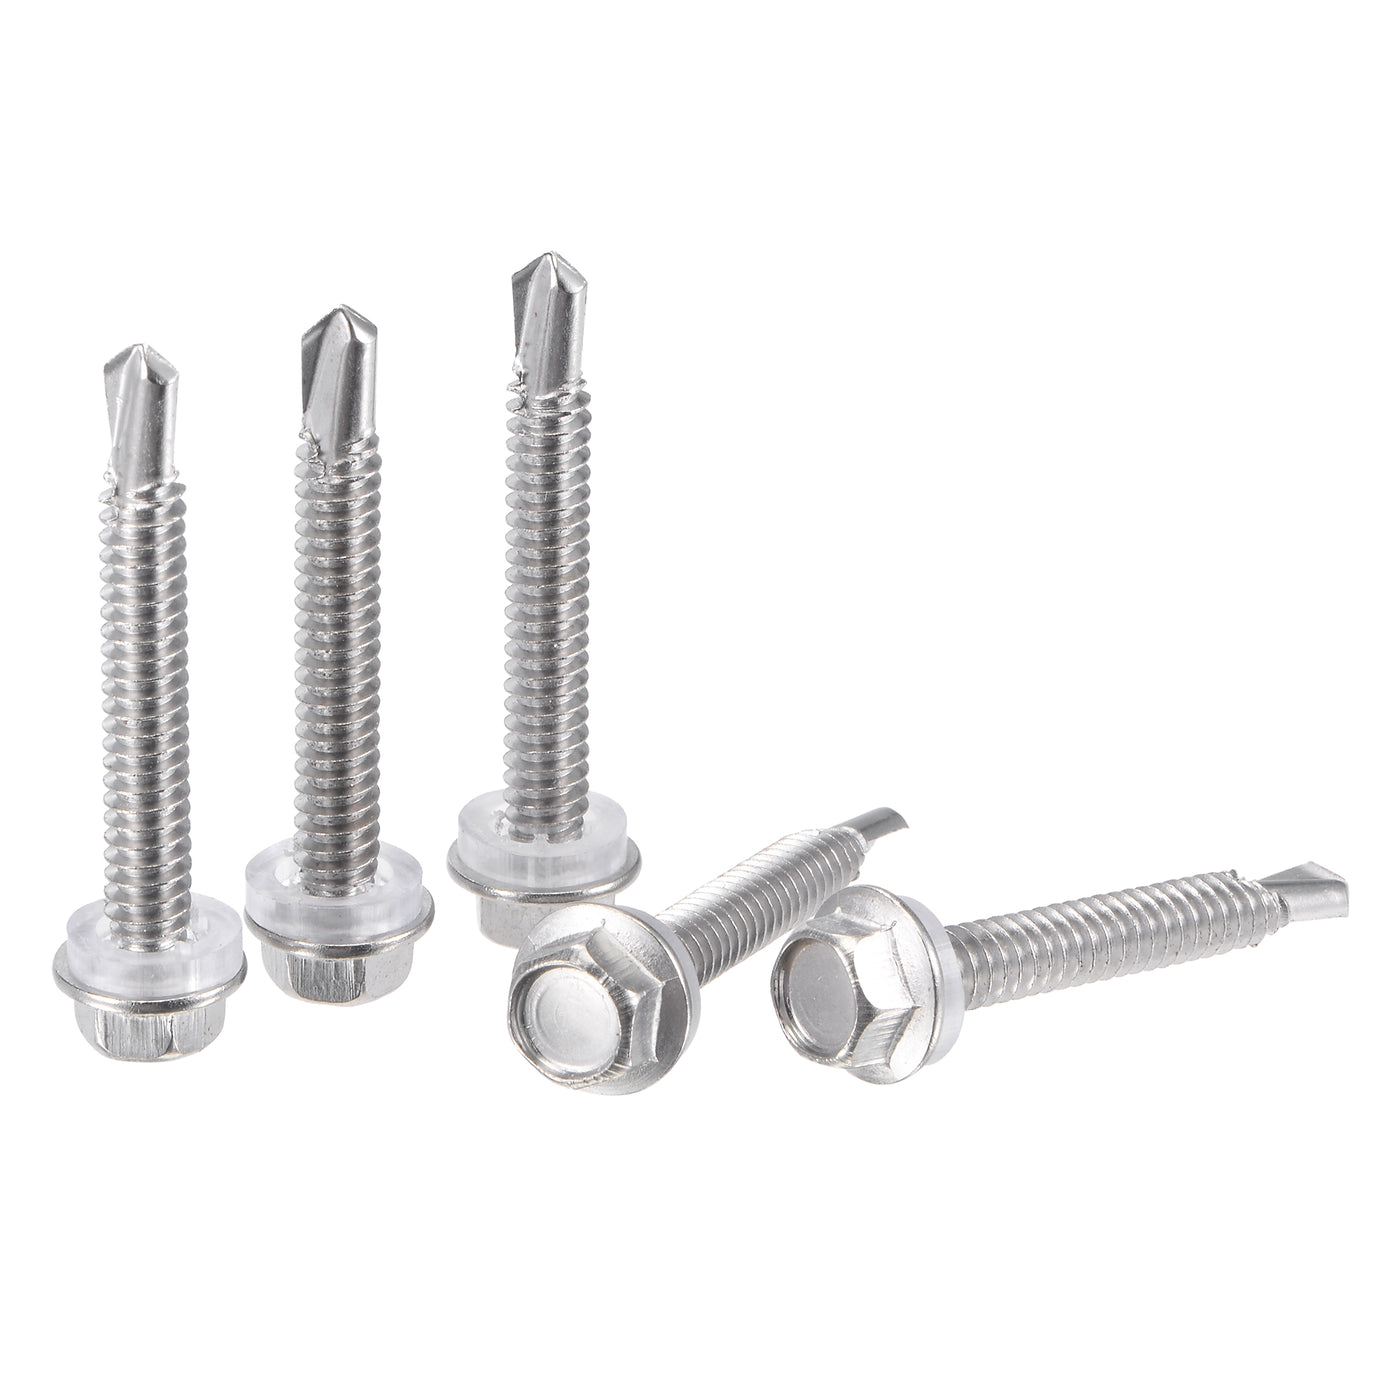 uxcell Uxcell #12 x 1 1/2" 410 Stainless Steel Hex Washer Head Self Drilling Screws 25pcs